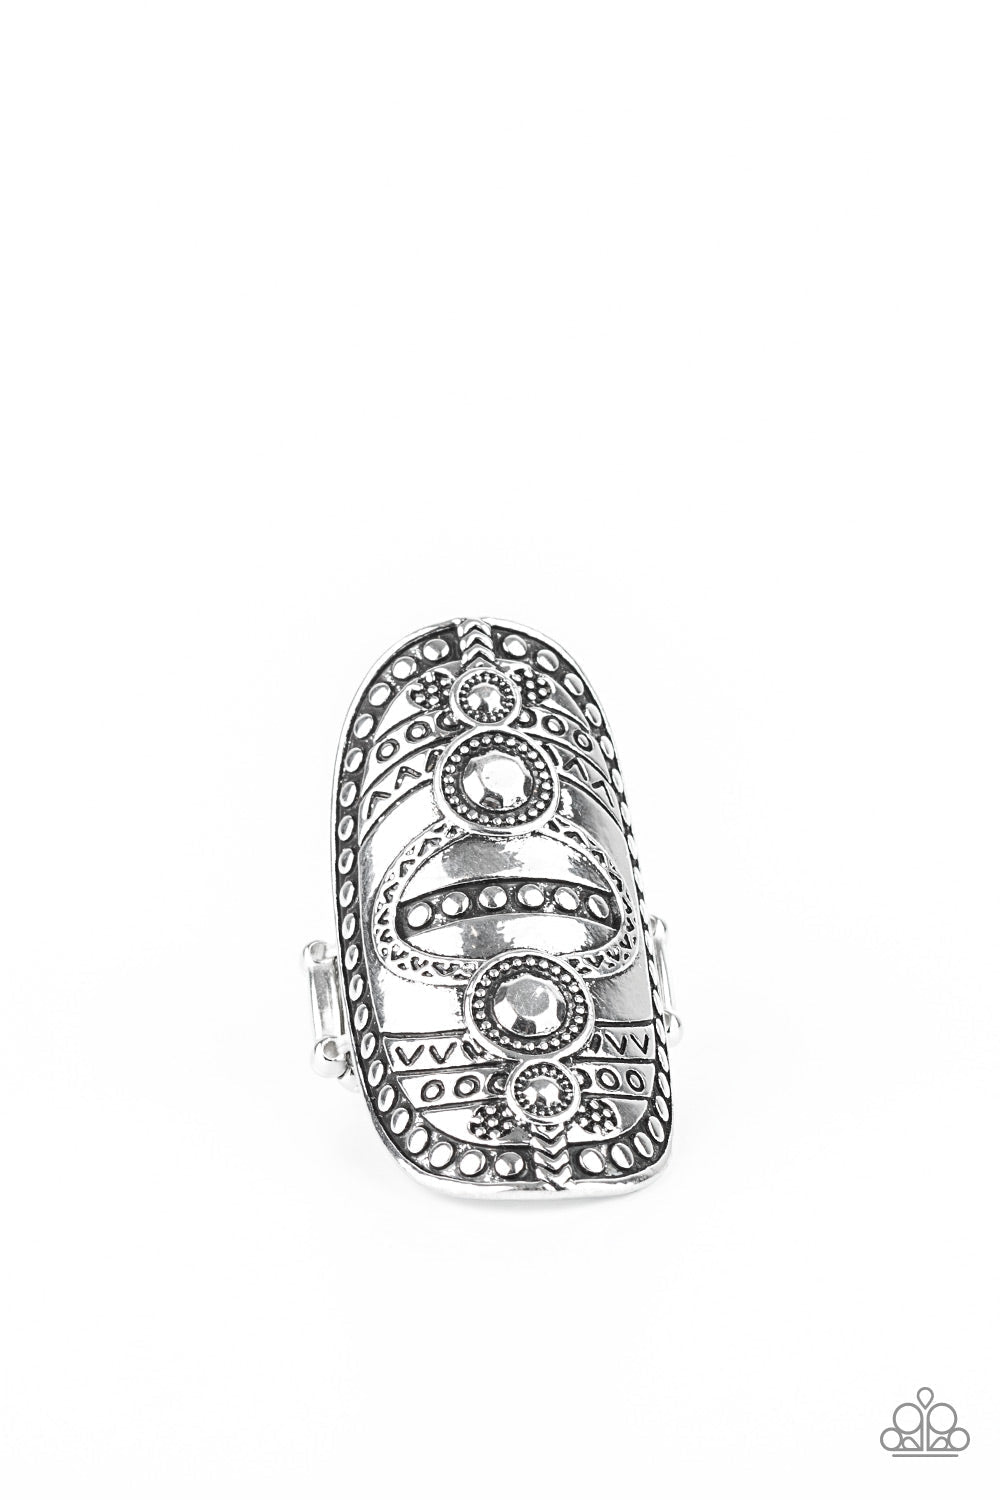 Tiki Trail - Silver Tribal Inspired Ring - Paparazzi Accessories - Studded and stamped in tribal inspired textures, an oversized silver frame folds around the finger for a rustically authentic look. Features a stretchy band for a flexible fit ring.